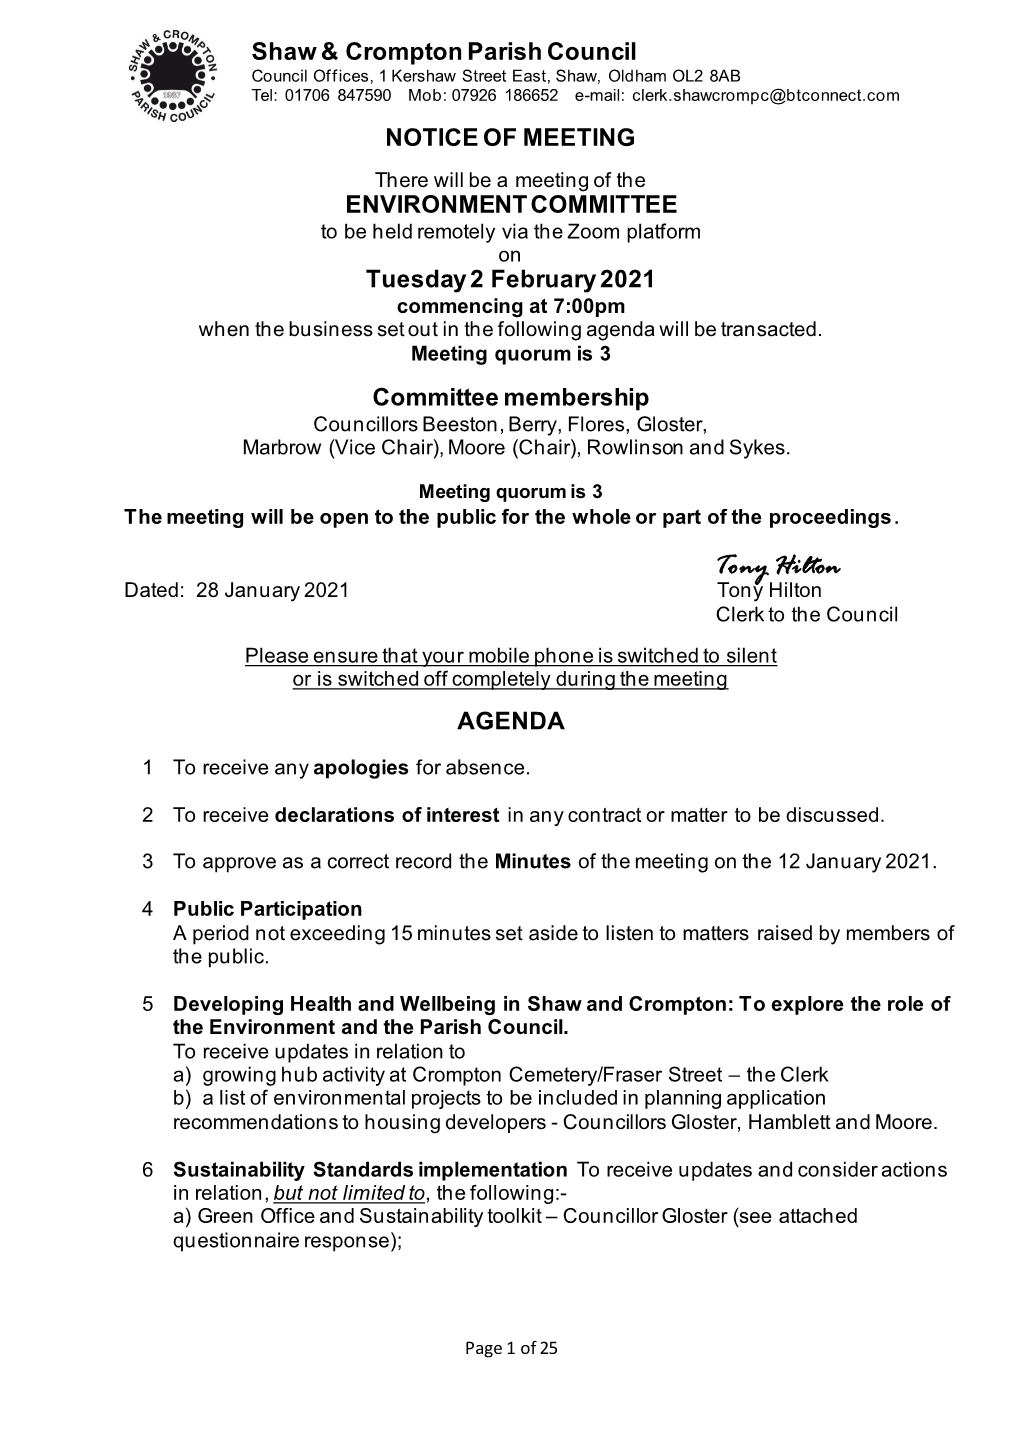 Remote Environment Committee Meeting Tuesday 2 February 2021